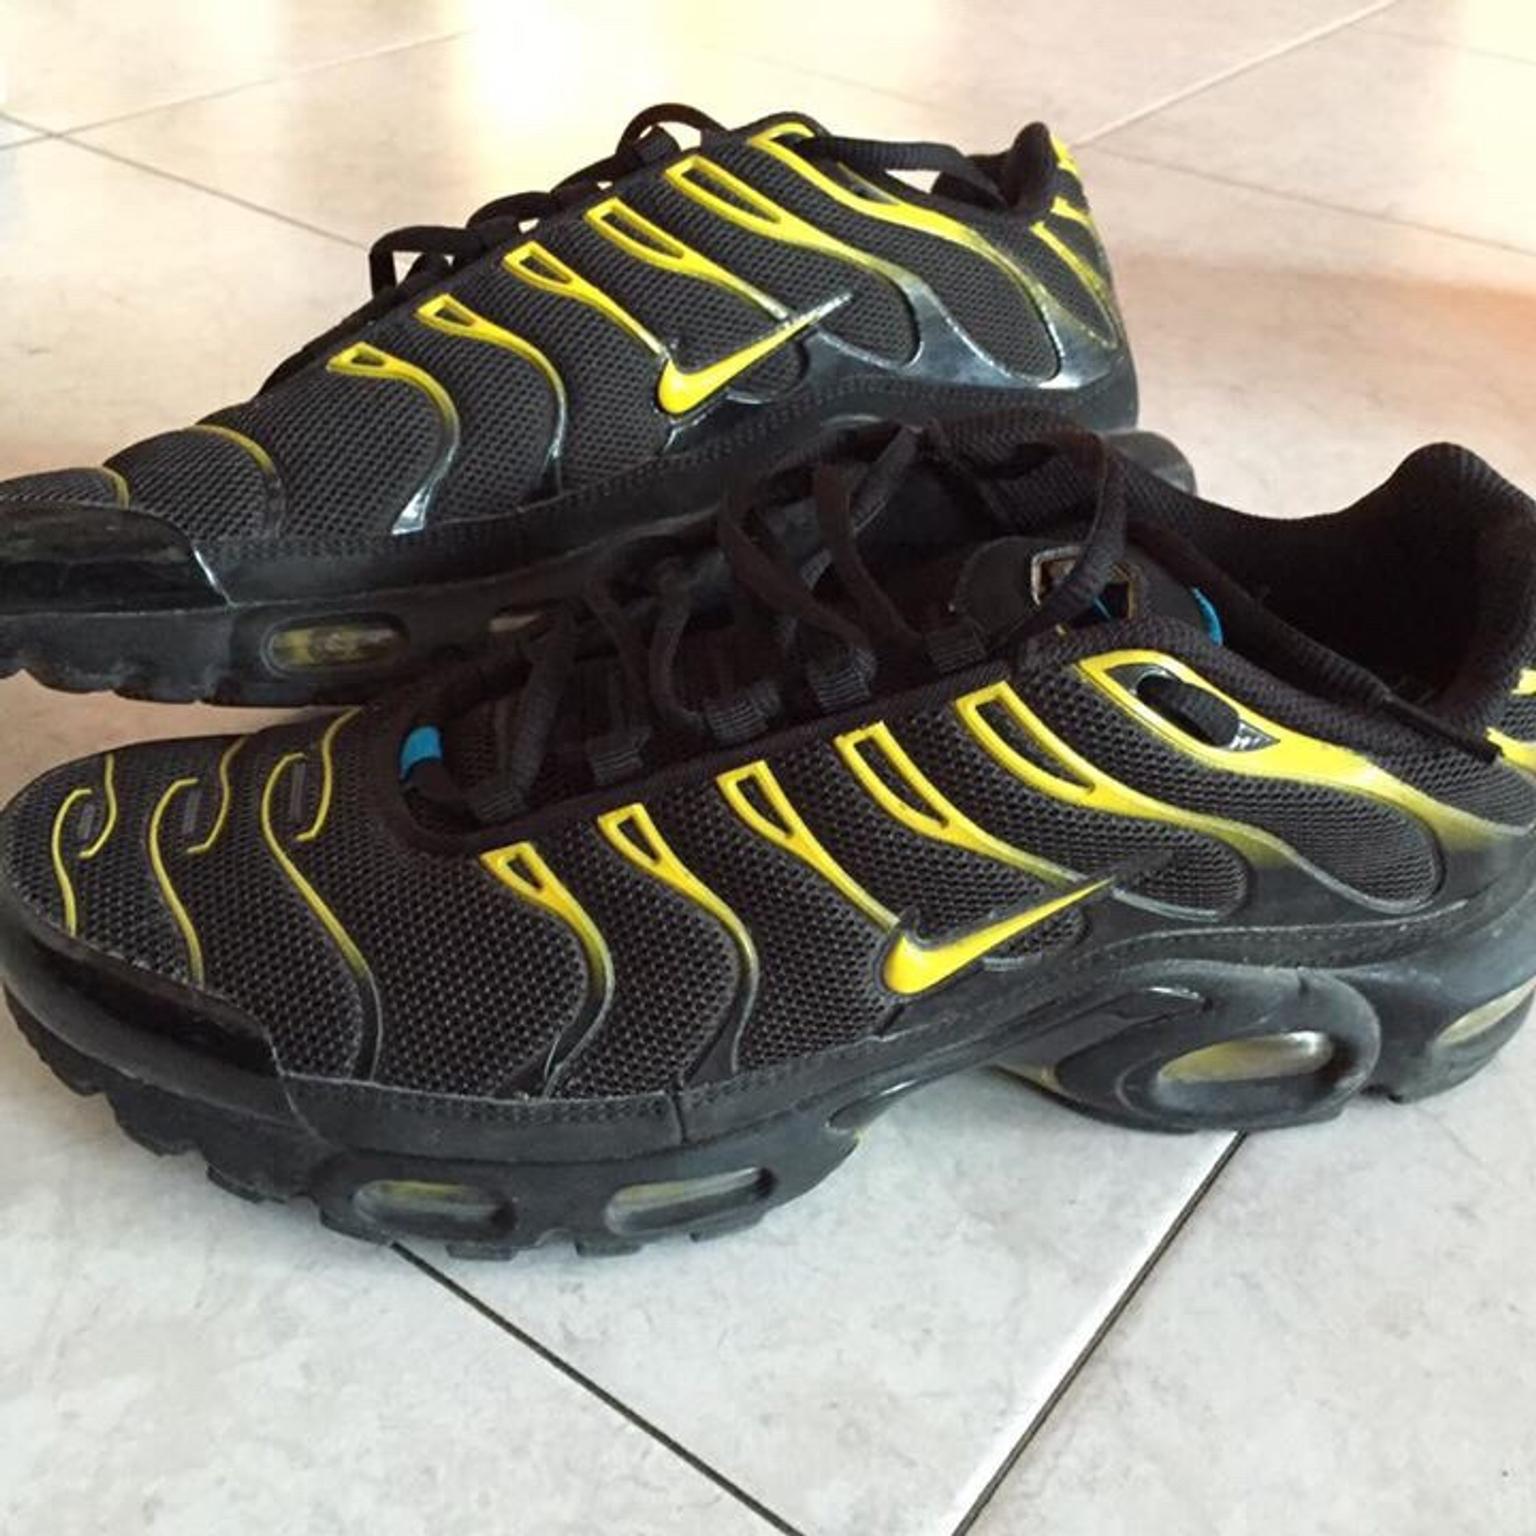 nike tn (44.5) in 20032 Cormano for €95.00 for sale | Shpock